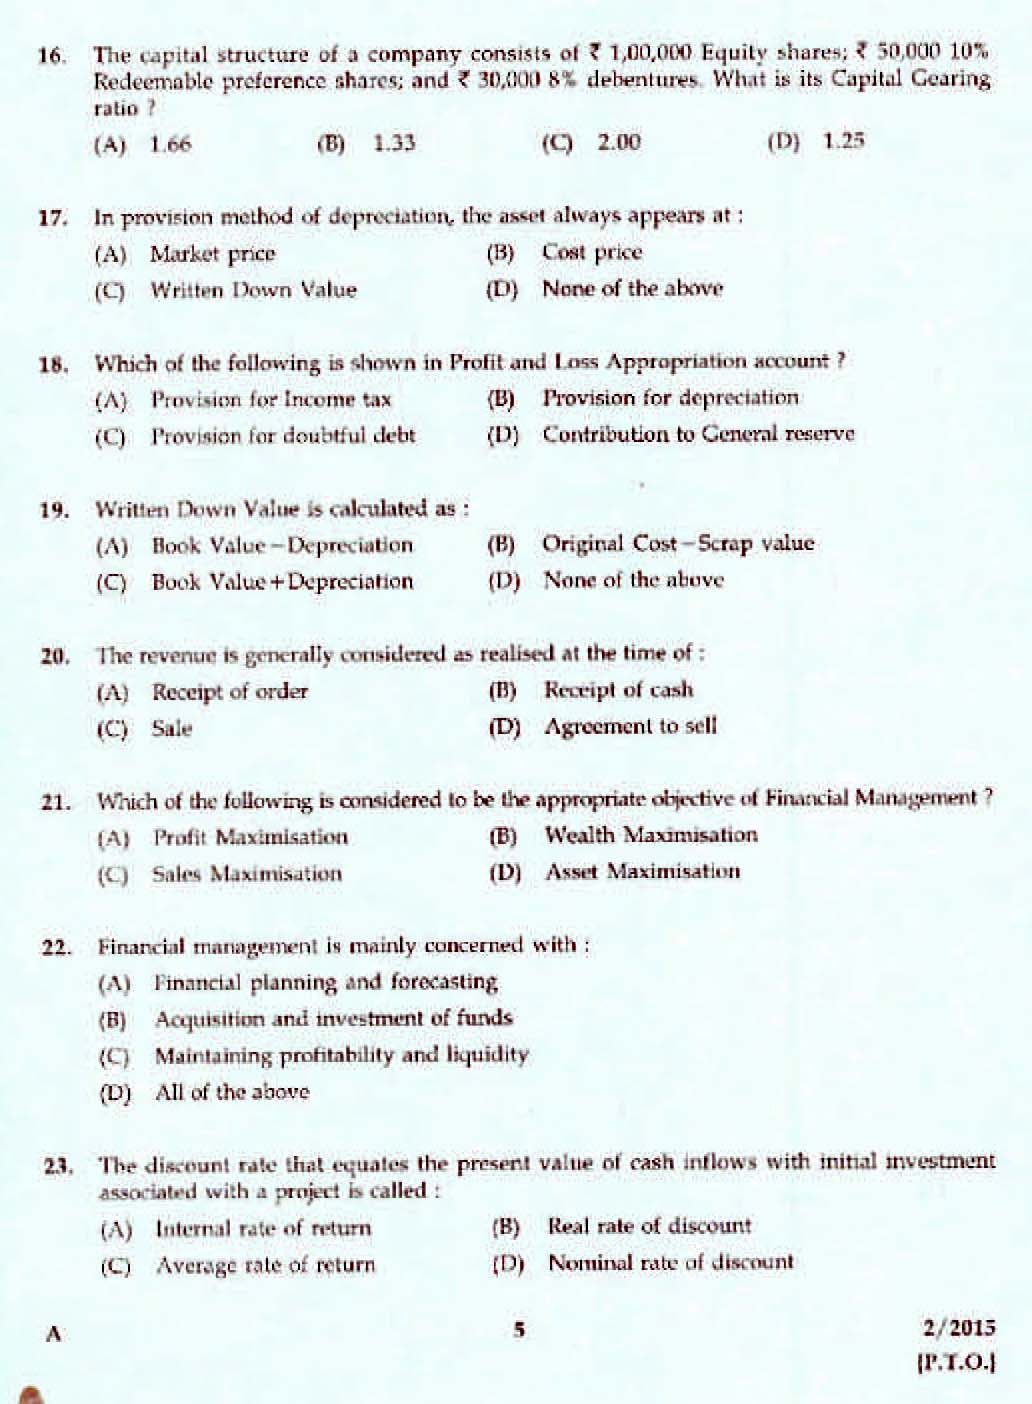 Kerala PSC Accounts Officer OMR Exam 2015 Question Paper Code 22015 3